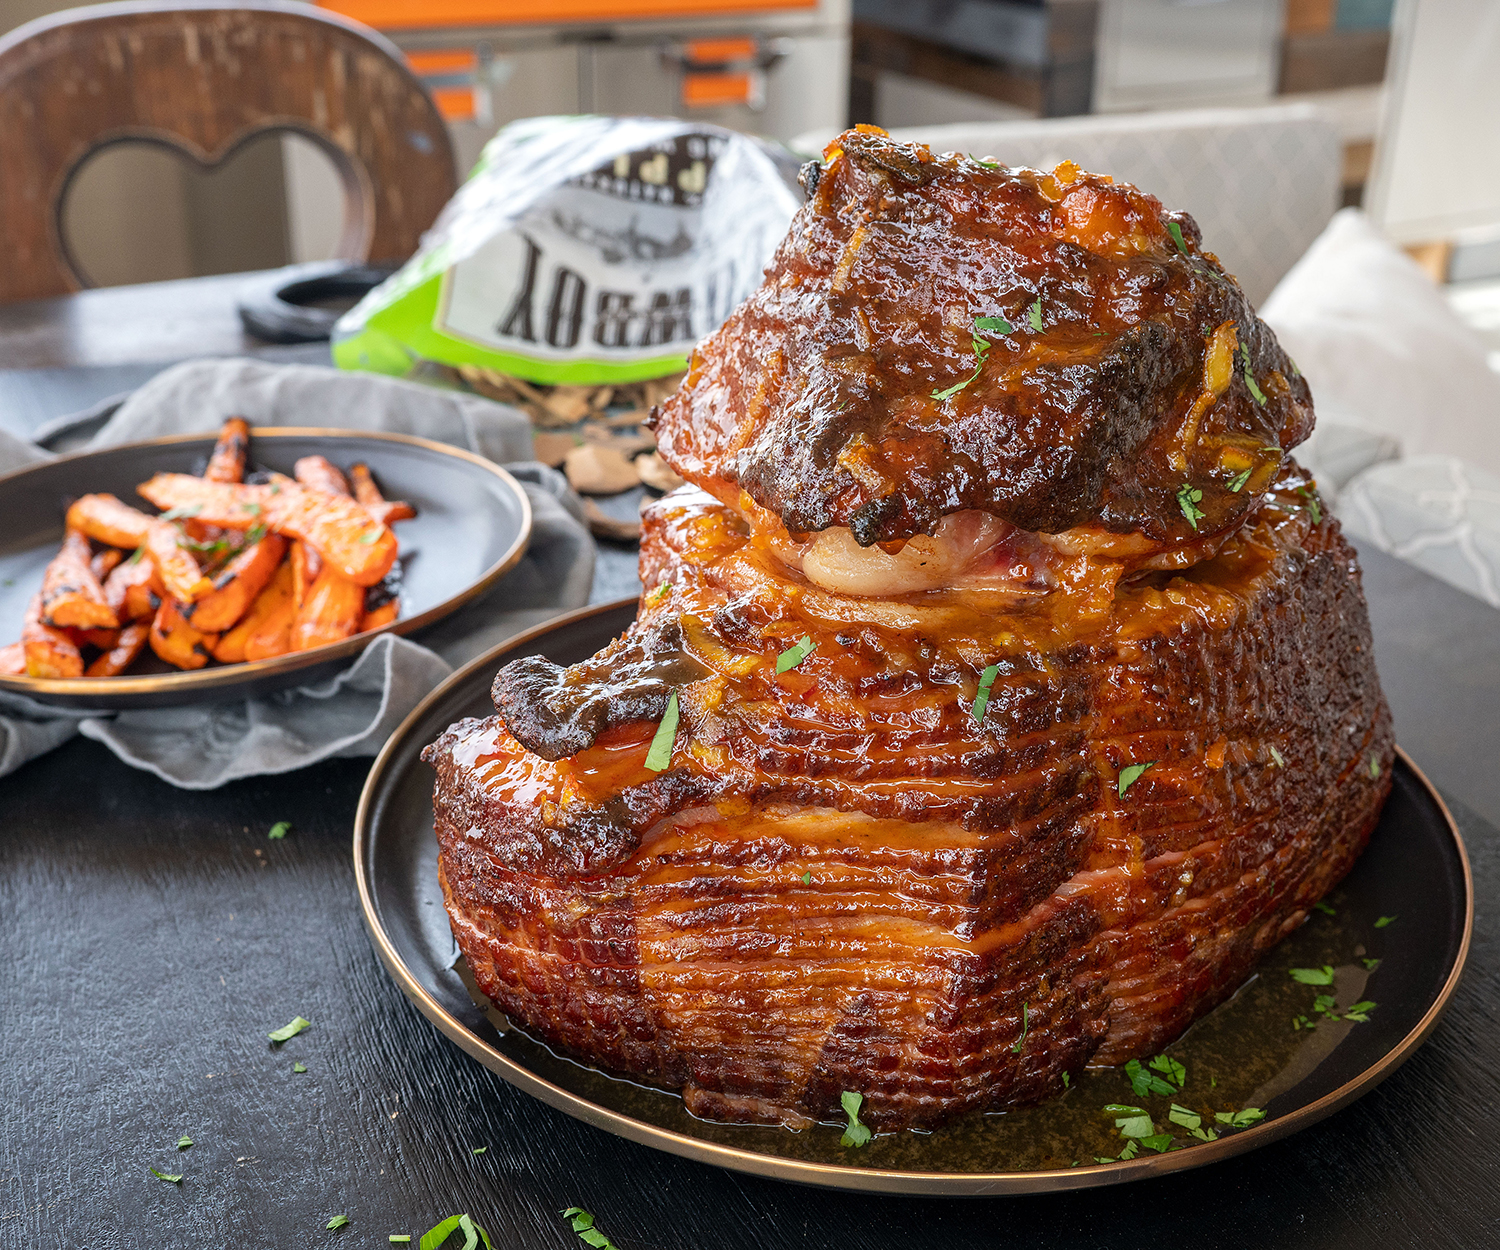 grilled ham on table with carrots and wood chips